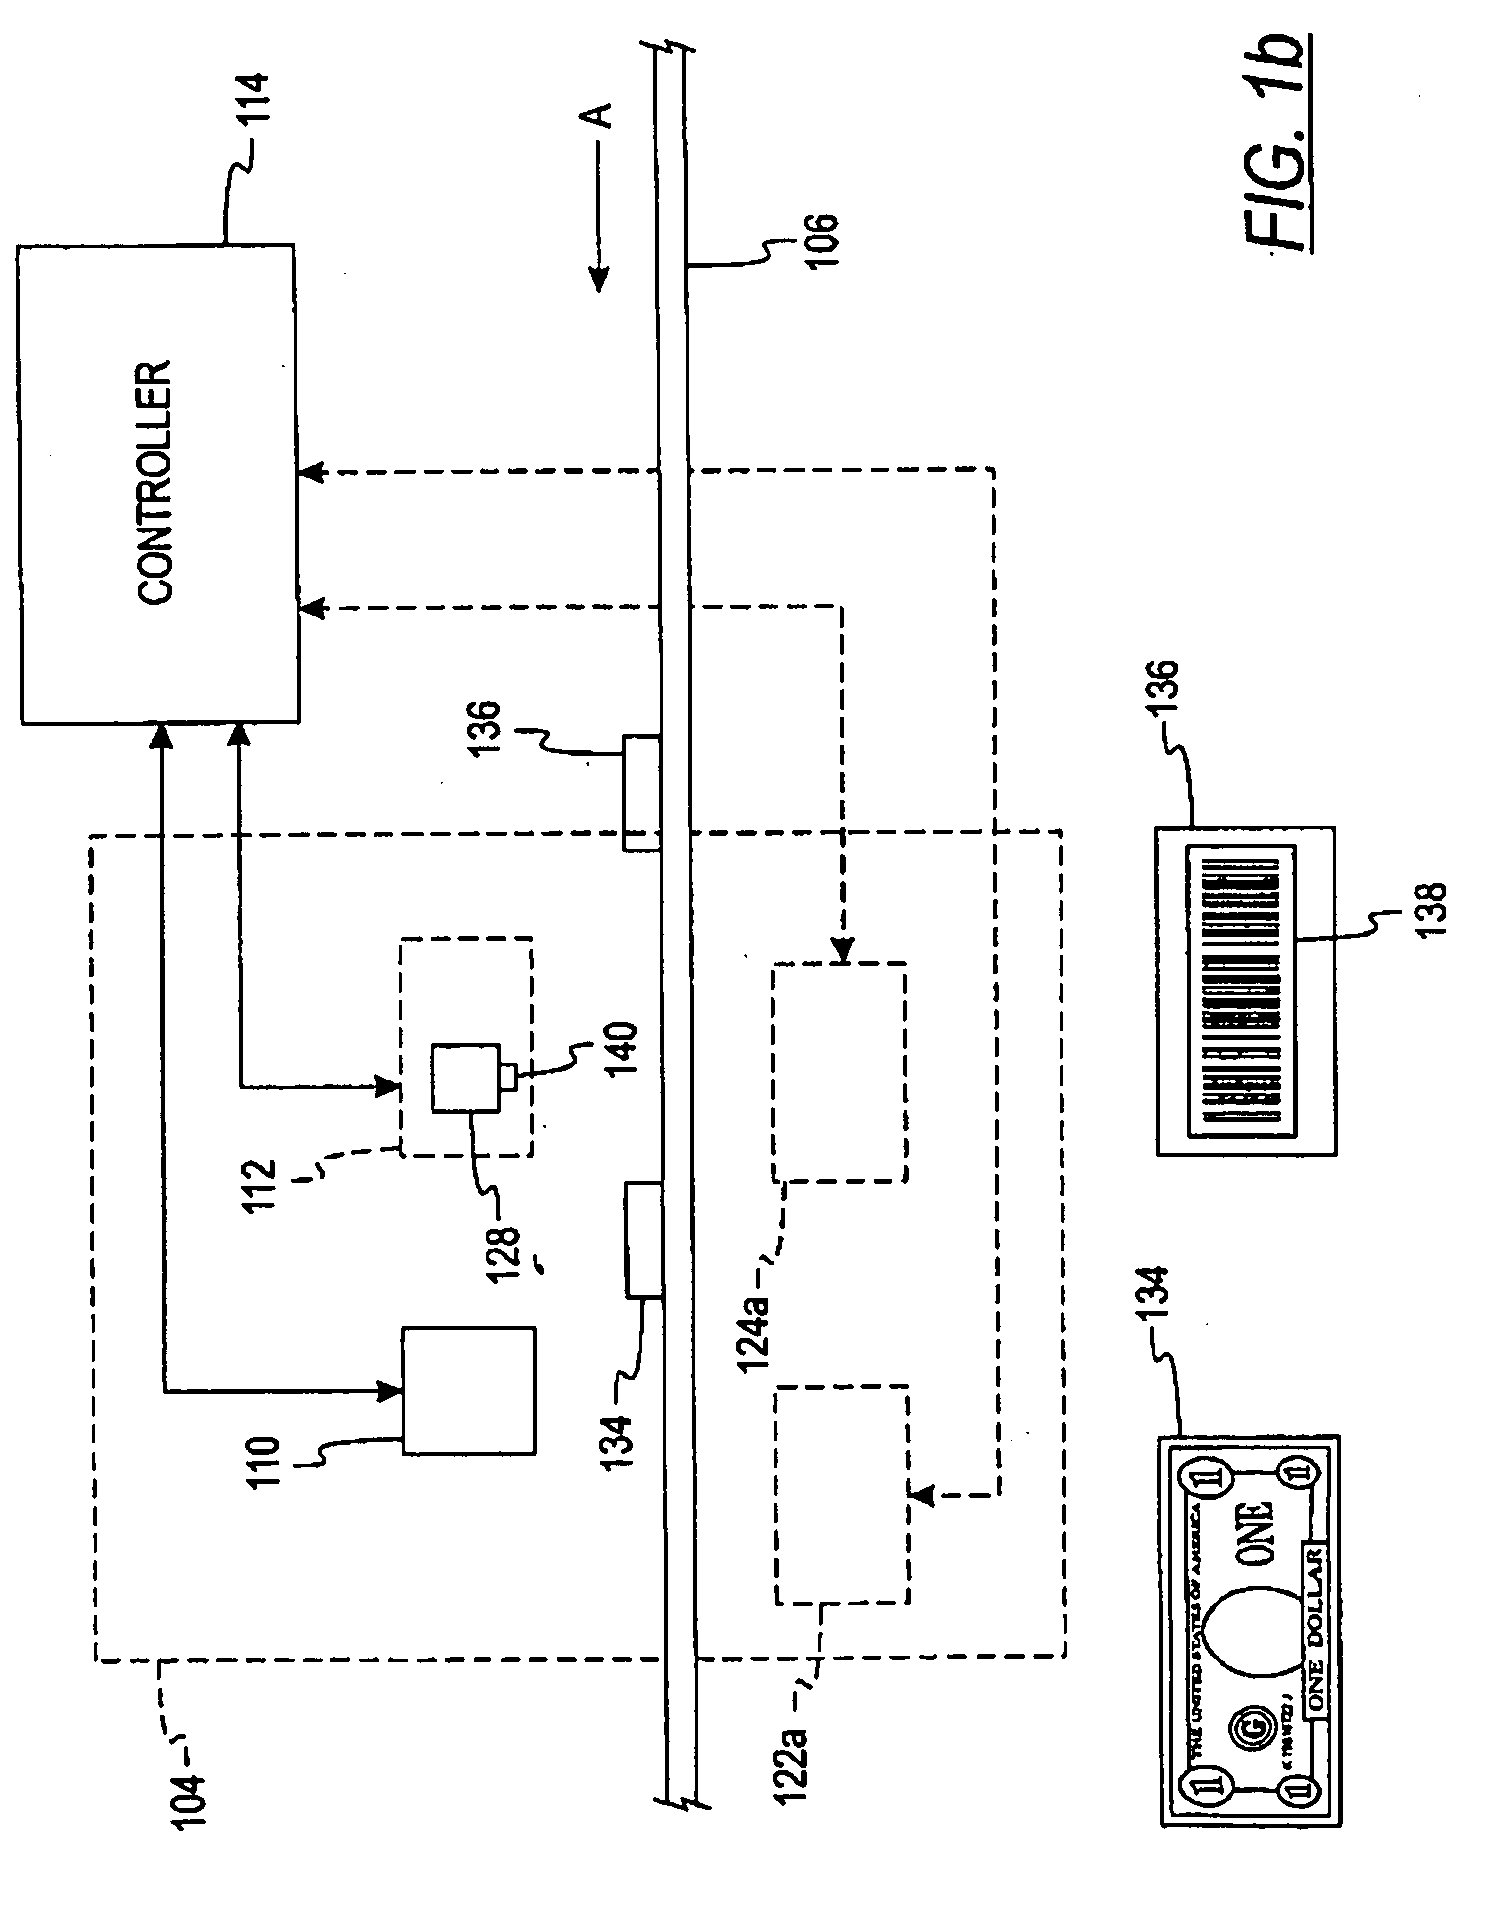 System and method for processing currency bills and tickets